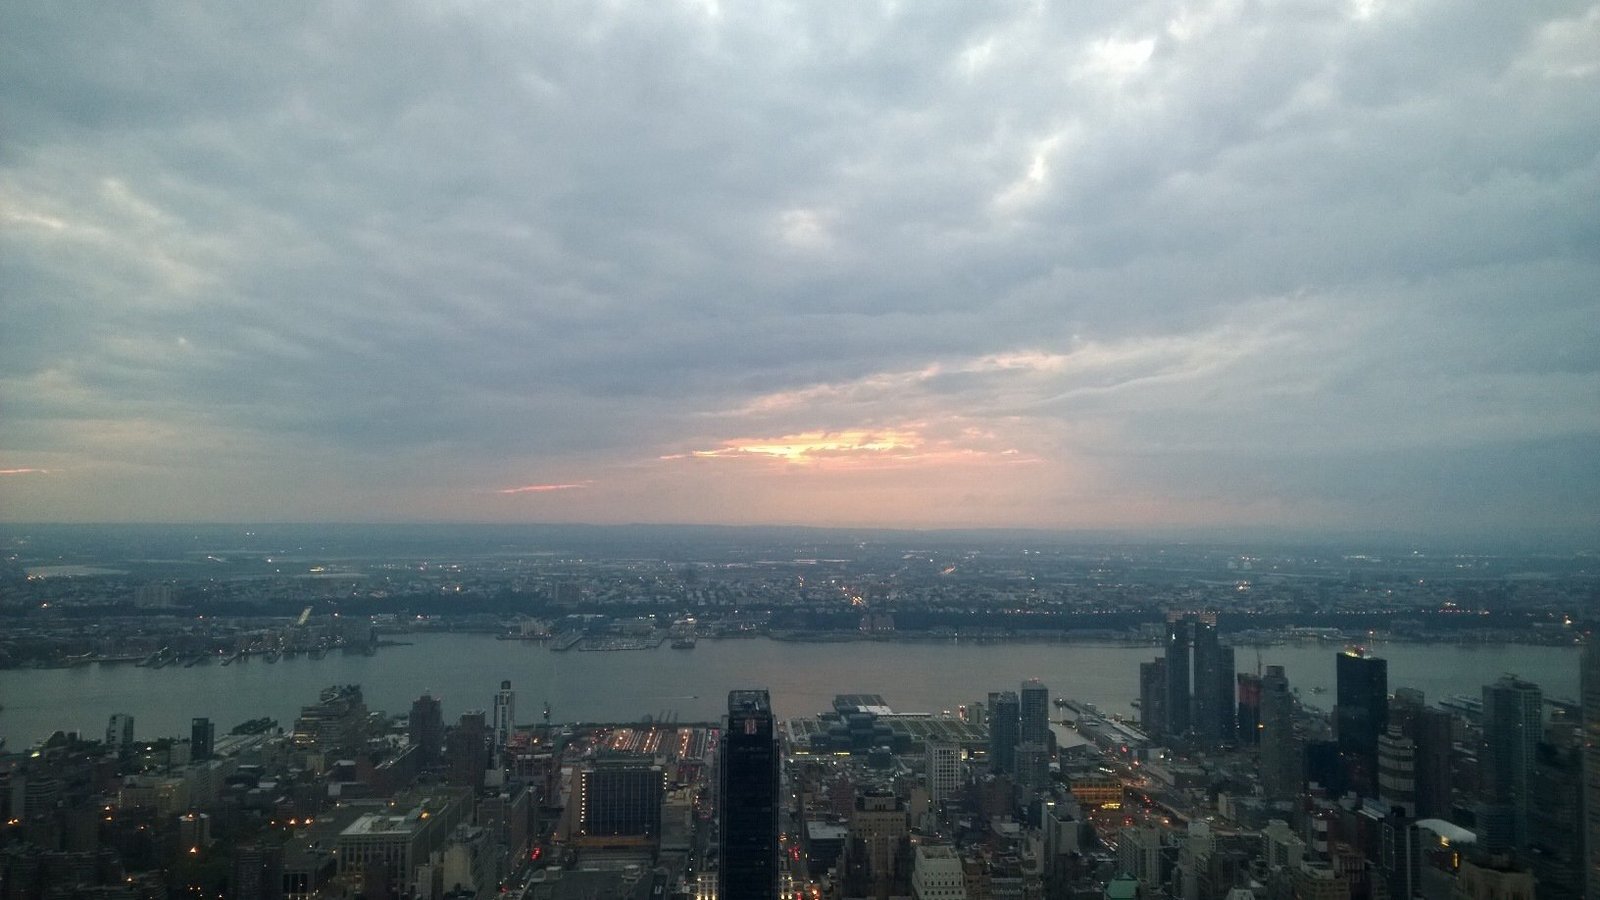 Wonderful Manhattan skyline view from the 86th floor of the Empire State Building, taken with the Lumia 1520's mighty camera.